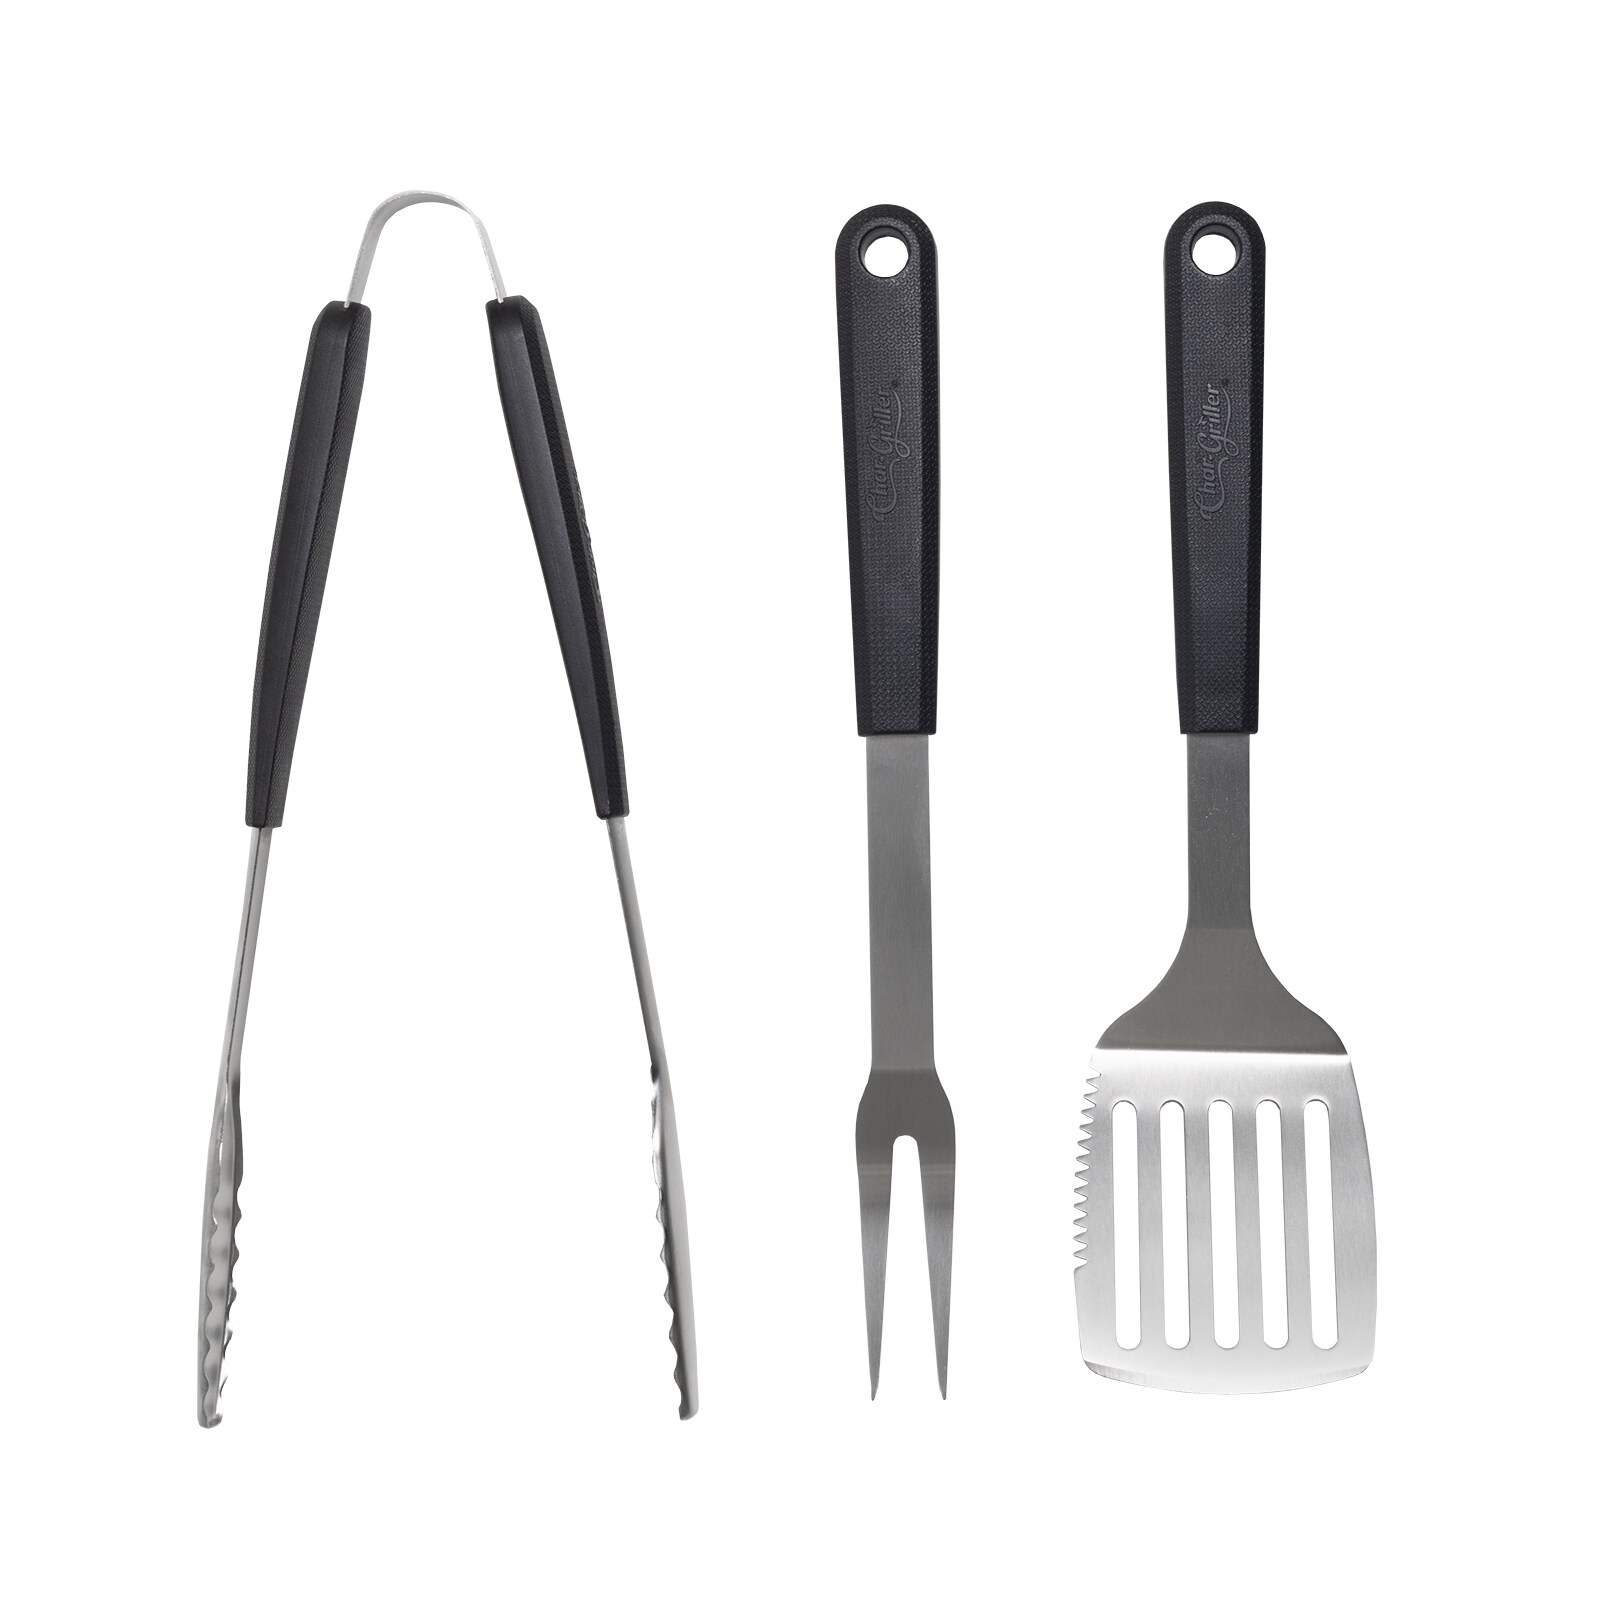 Char-Griller BBQ 3-PIECE TOOL SET CG3PCSET Spatula Tongs & Fork,Stainless Steel 